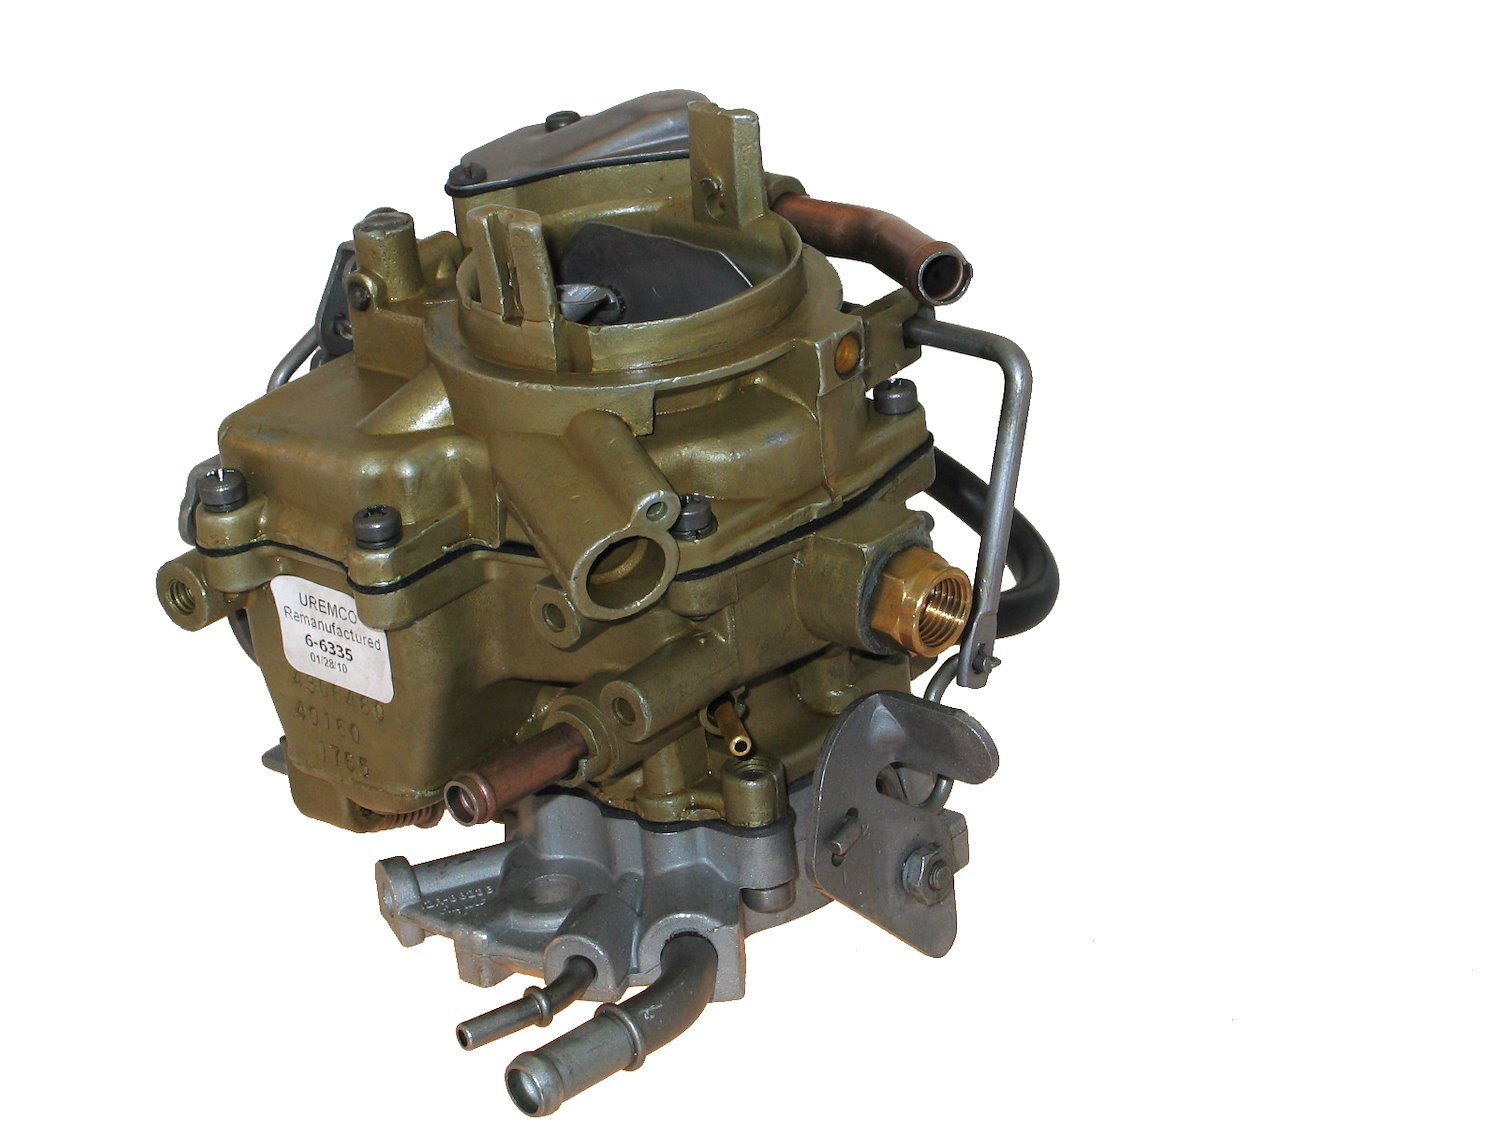 6-6335 Holley Remanufactured Carburetor, 1945-Style